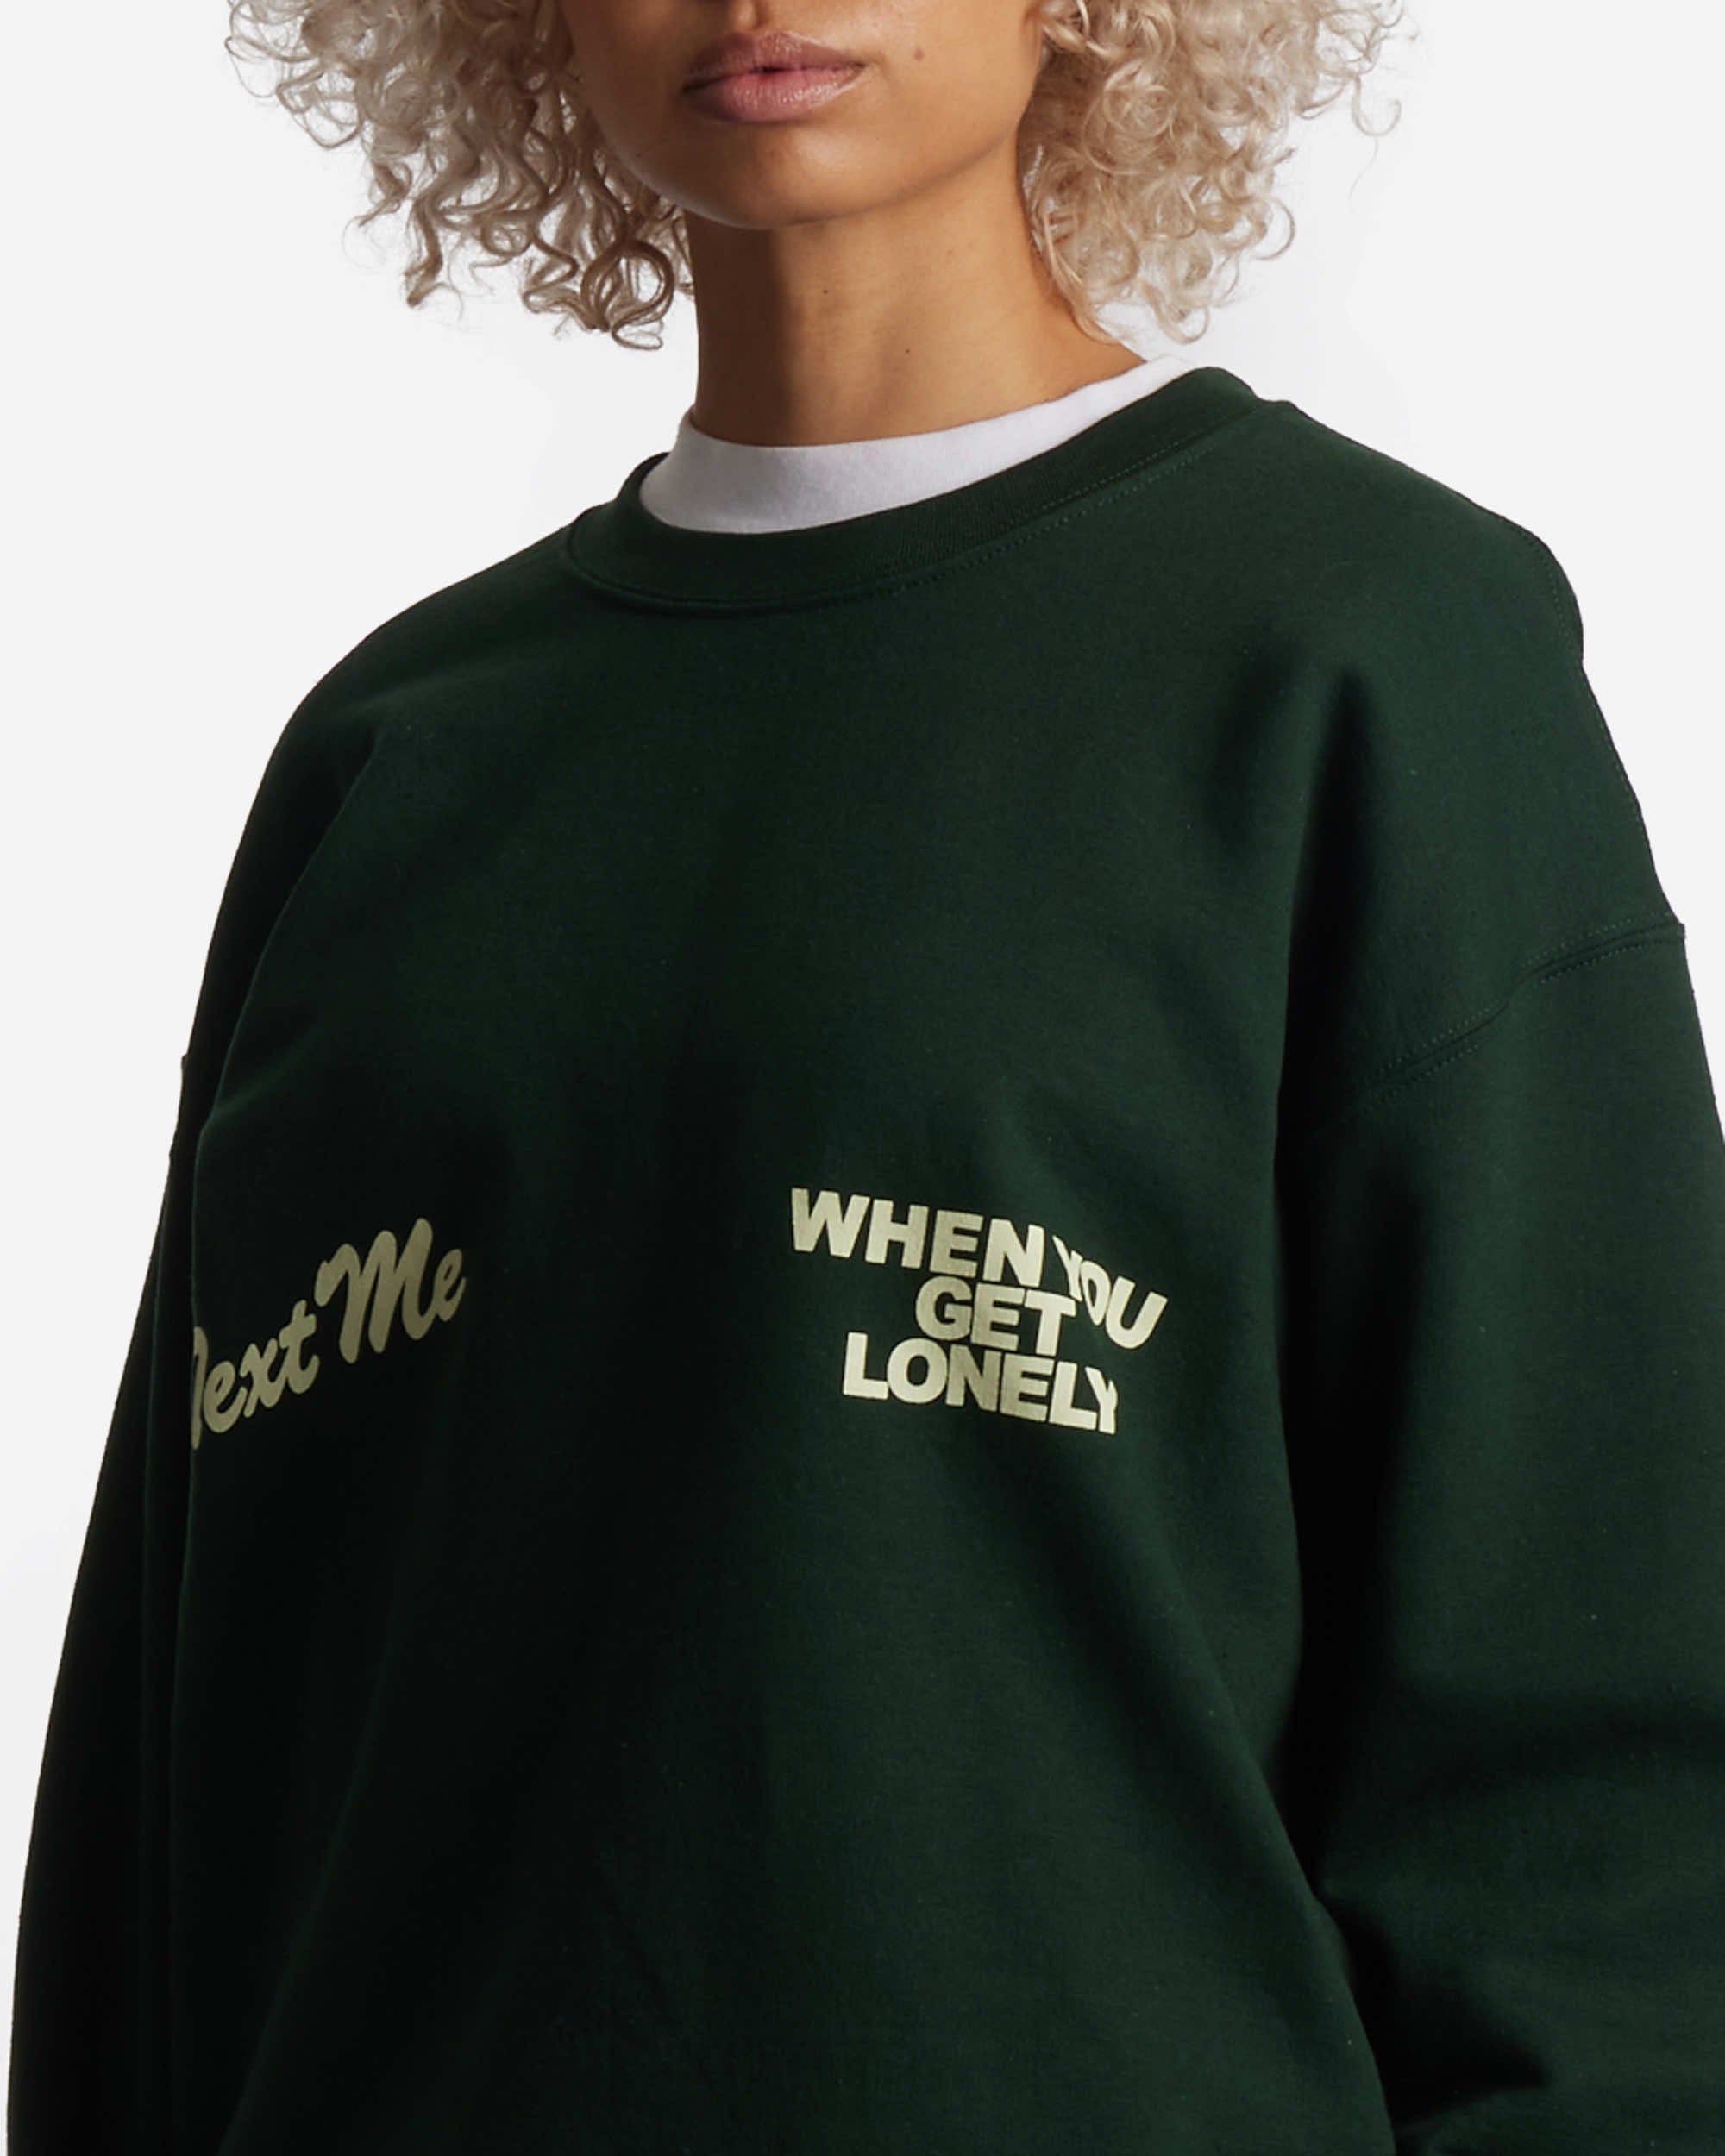 Text Me When You Get Lonely Crewneck Sweater